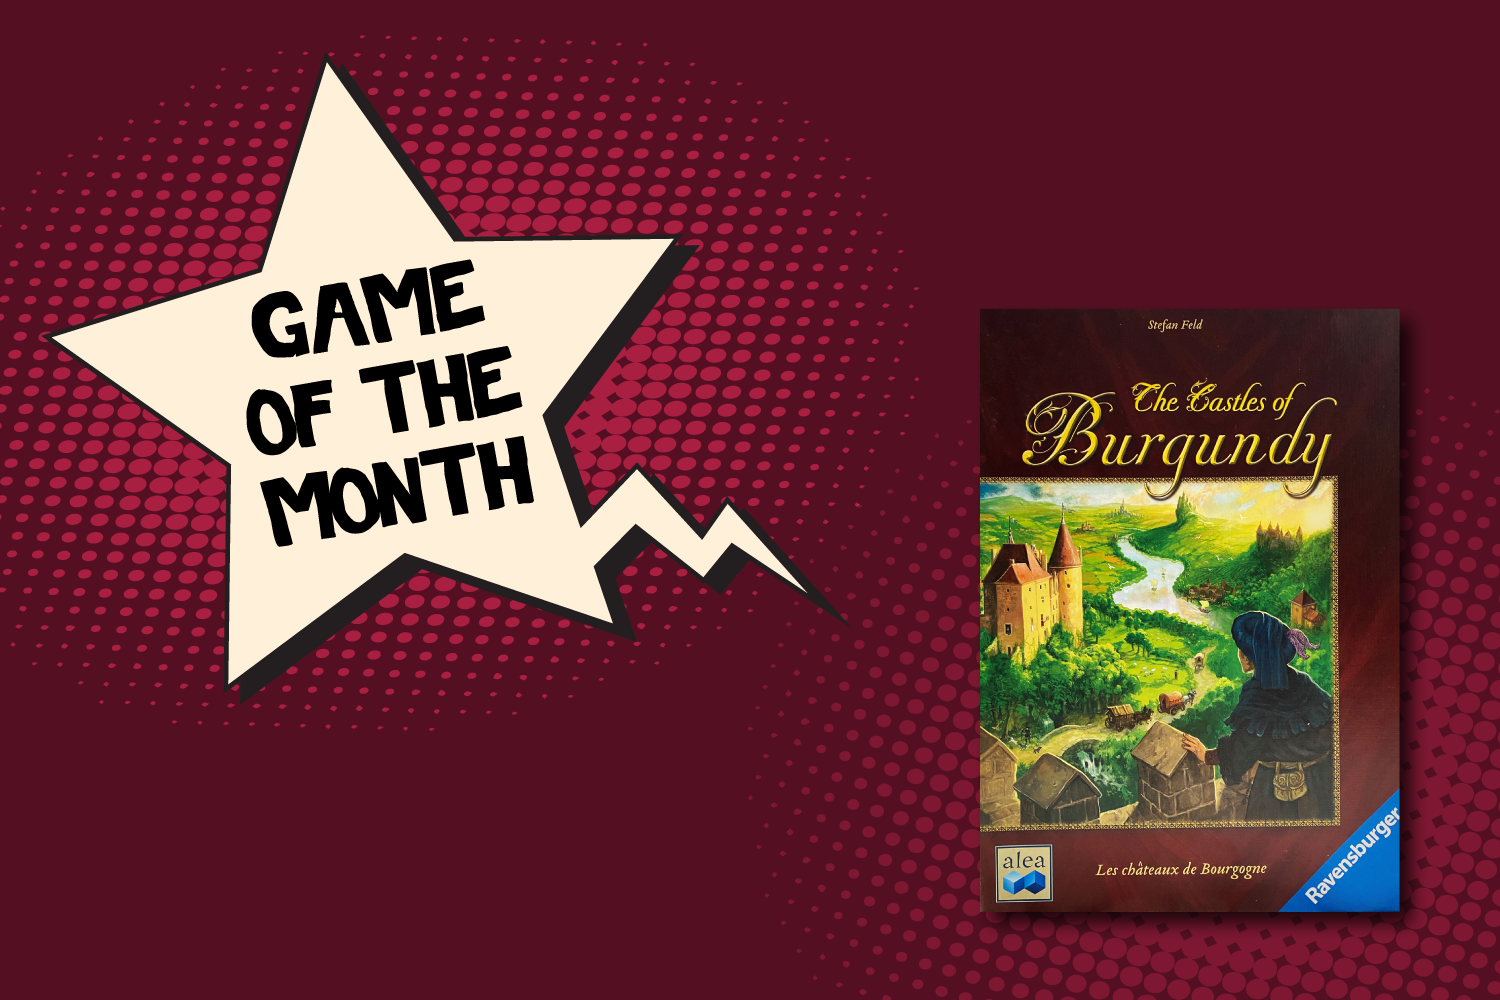 Castles-of-Burgundy-Game-of-the-Month